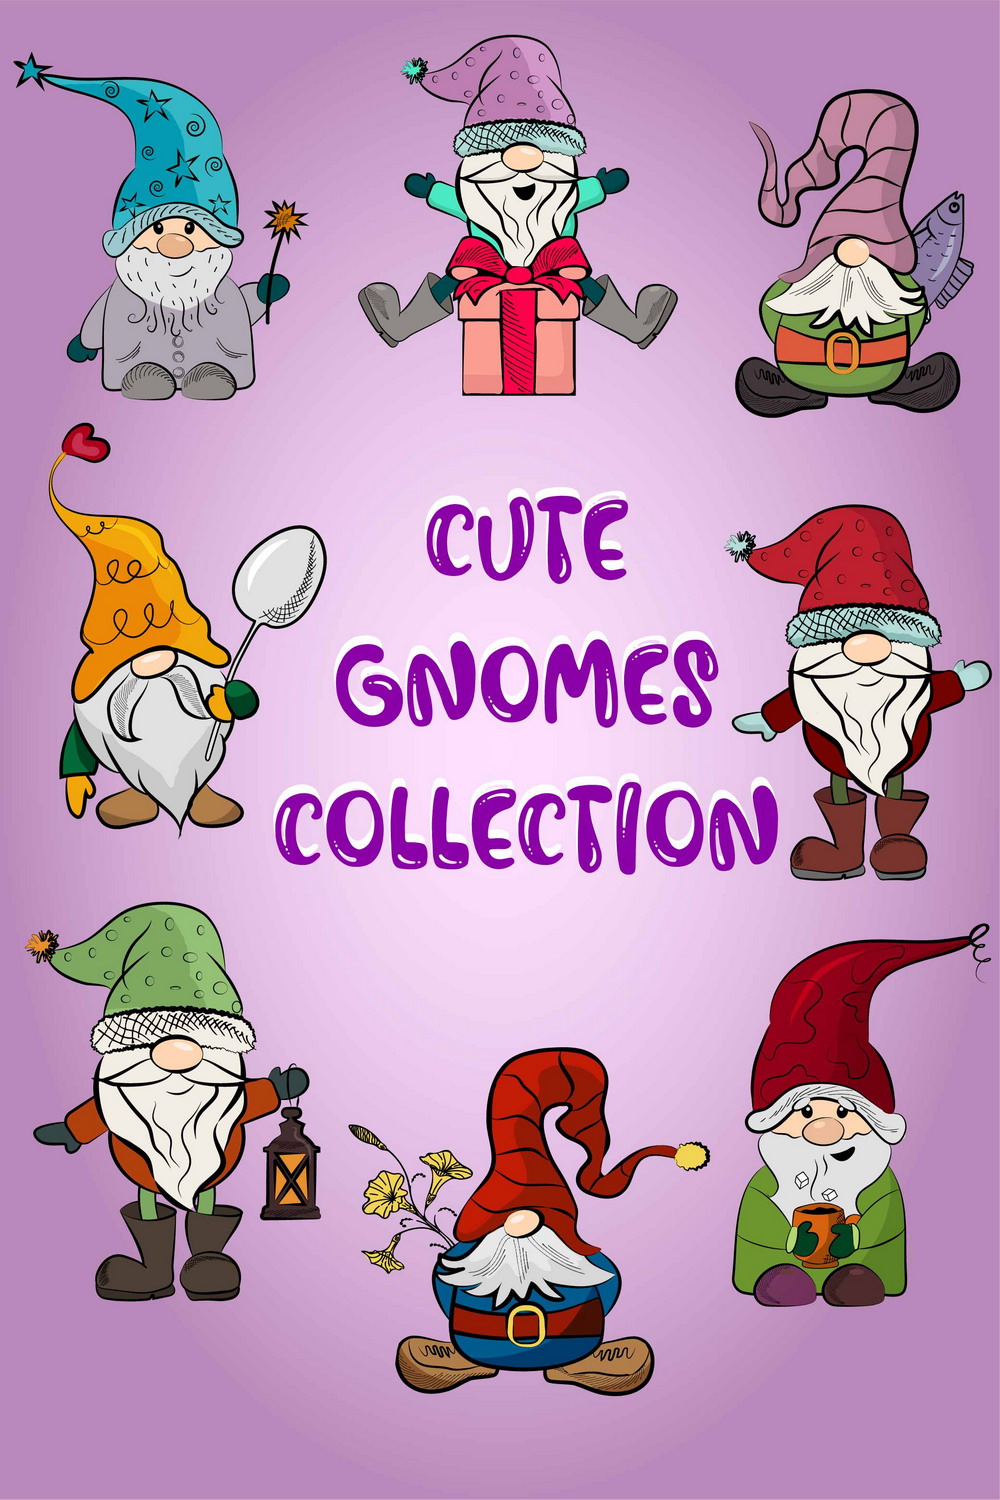 Cute Gnomes Collection - Pinterest.